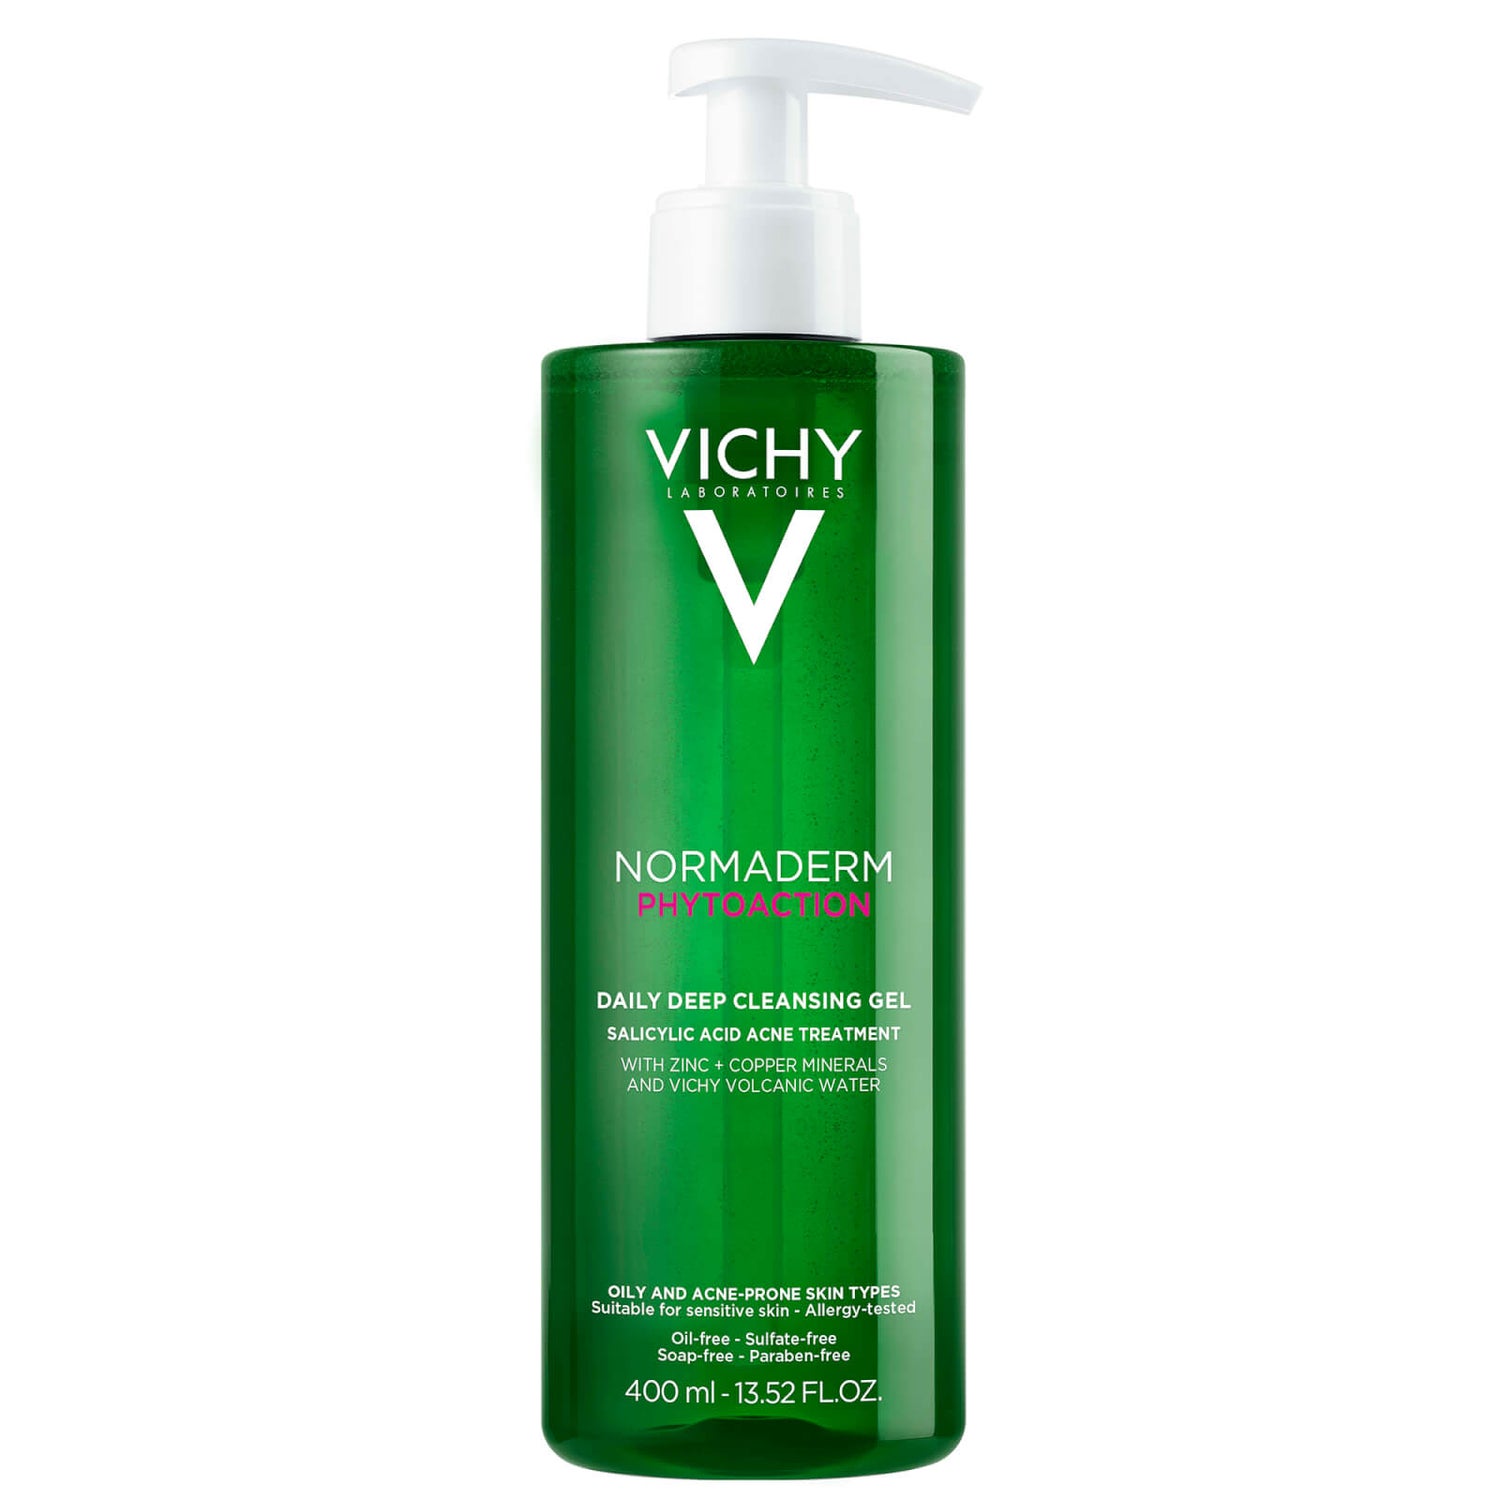 Vichy Normaderm PhytoAction Daily Acne Treatment Face Wash 400ml